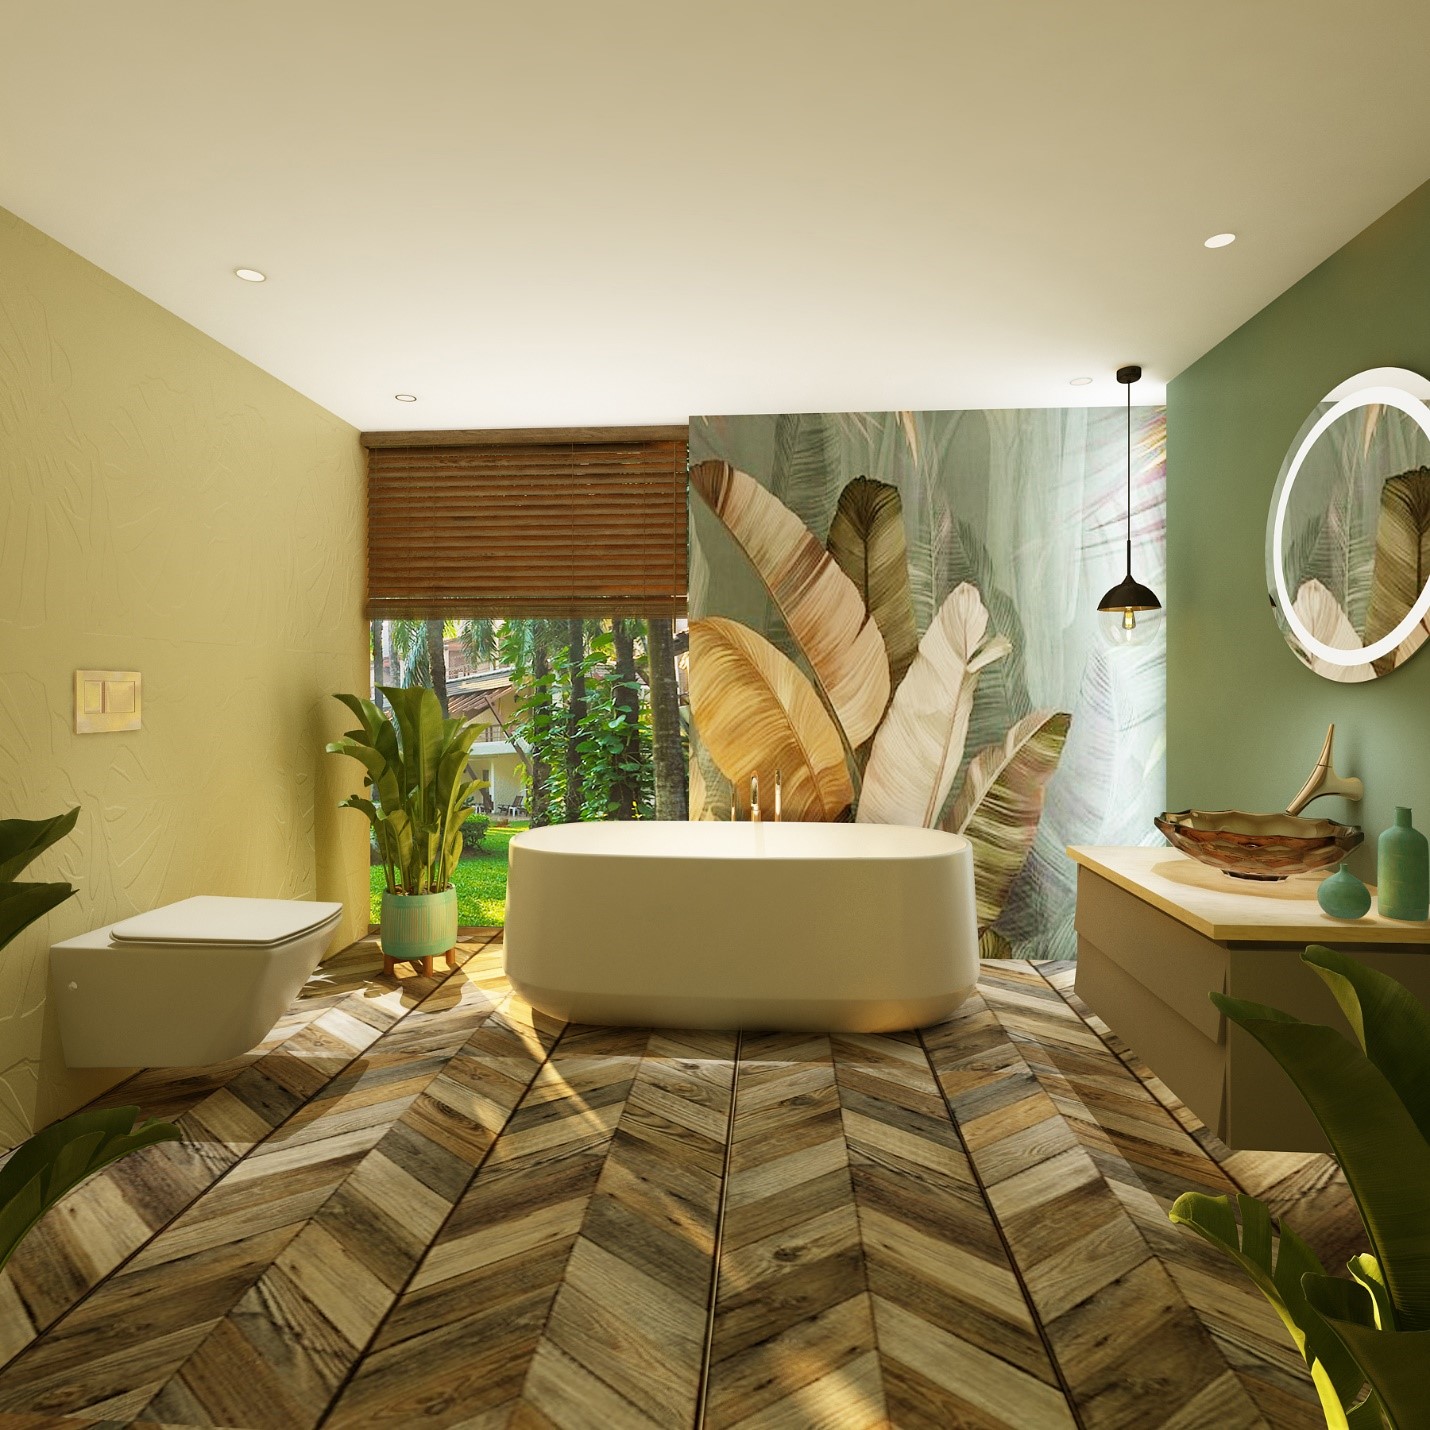 Bring Nature's Abode to Your Bathroom